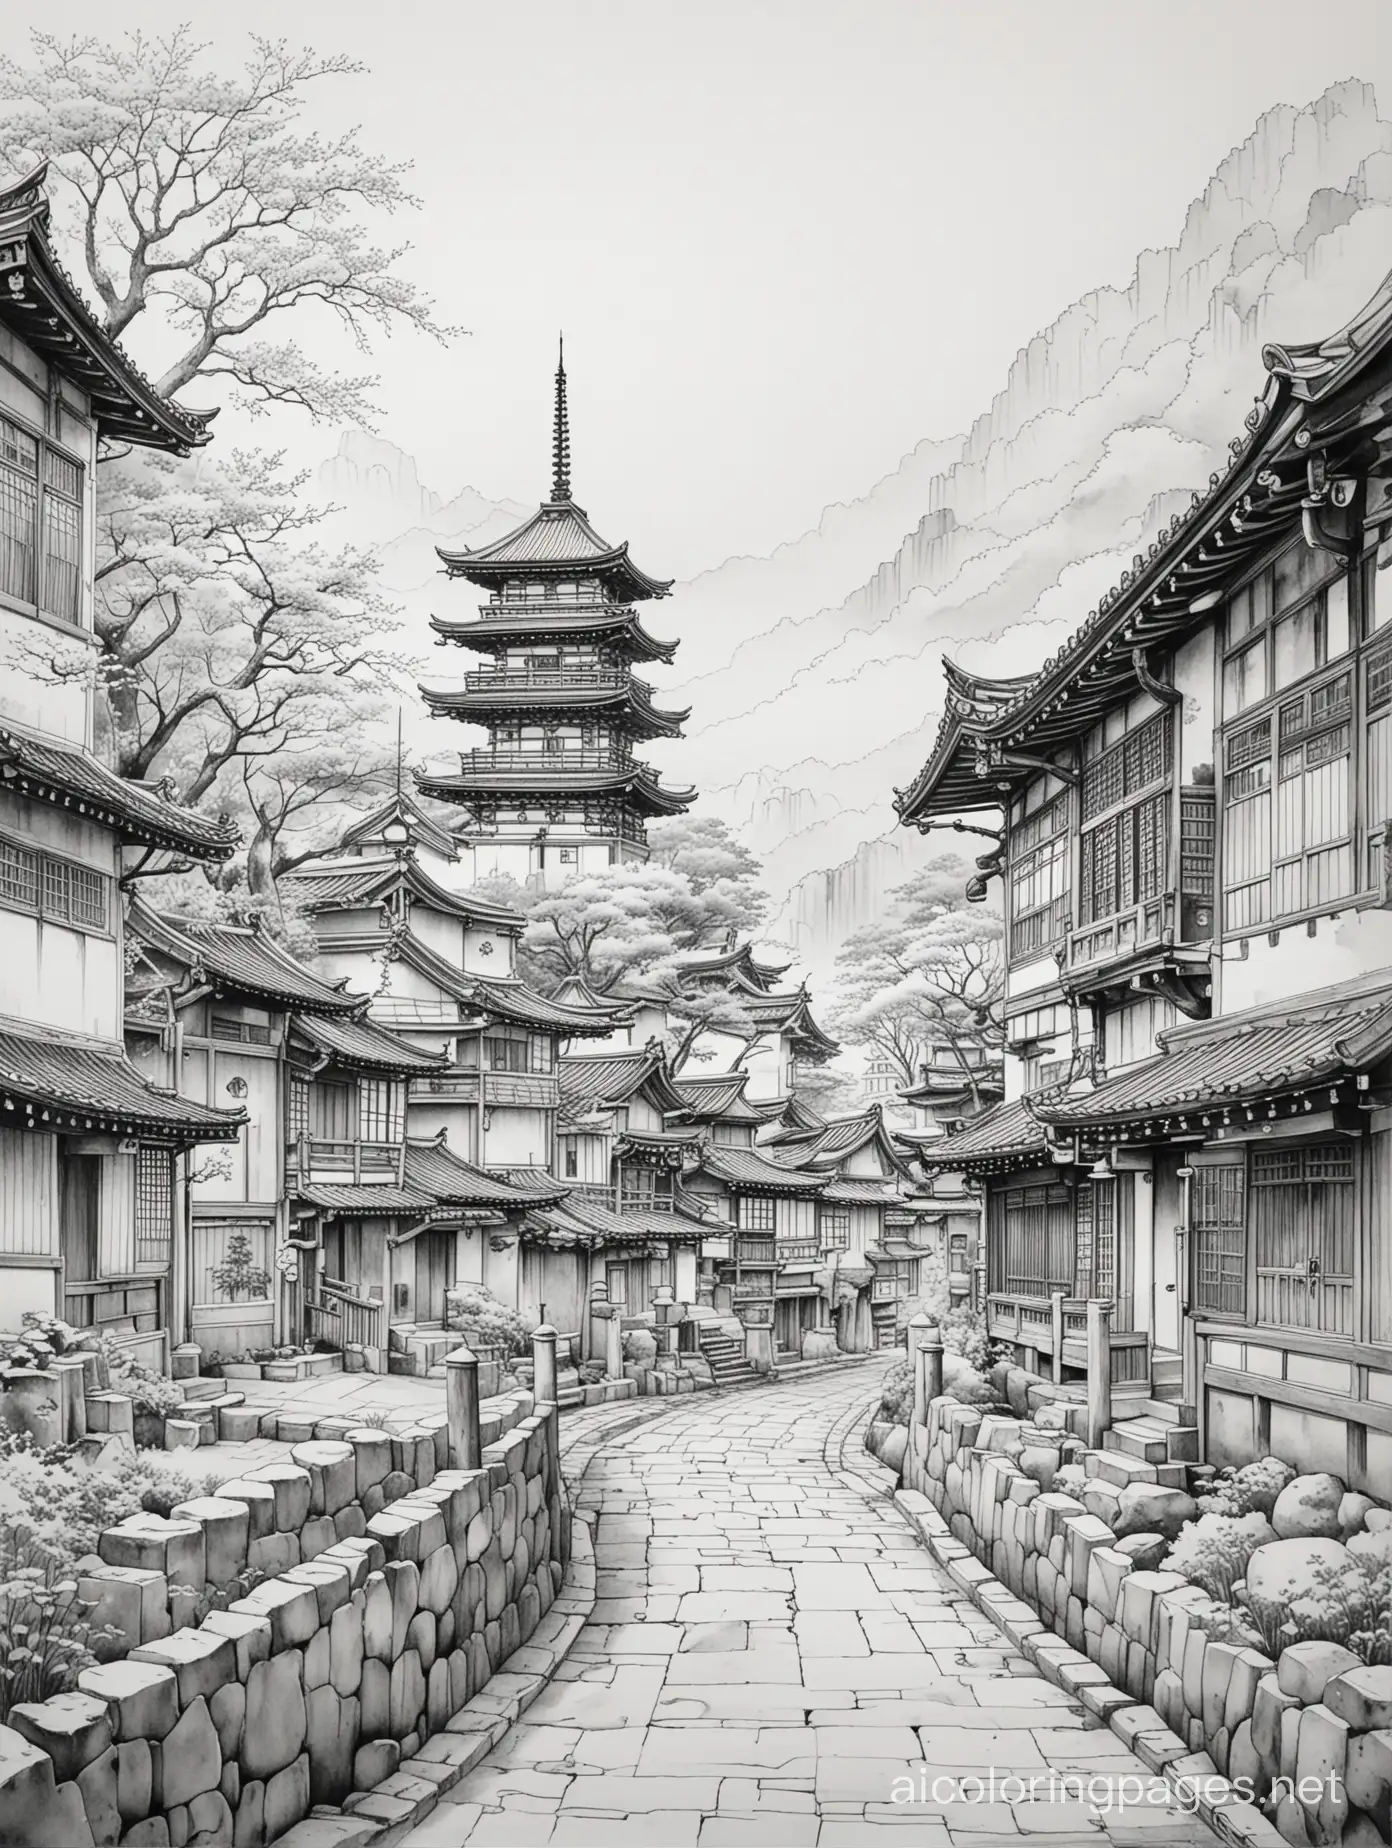 Watercolor painting, Japanese style, Kojiki, mythology, building, one-story streetscape, coloring book, thin lines, no color, castle town, Coloring Page, black and white, line art, white background, Simplicity, Ample White Space. The background of the coloring page is plain white to make it easy for young children to color within the lines. The outlines of all the subjects are easy to distinguish, making it simple for kids to color without too much difficulty